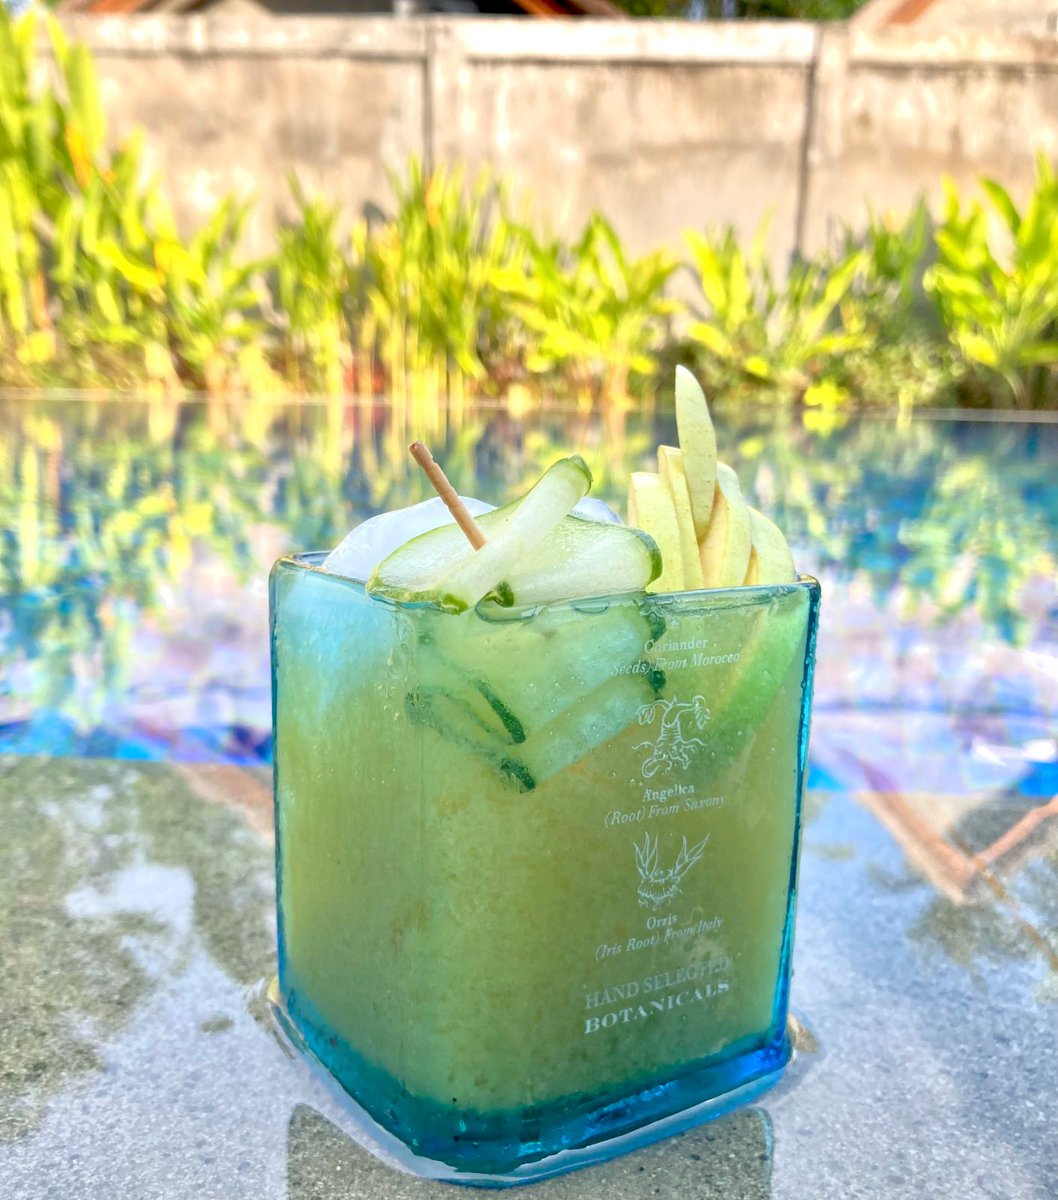 Don’t miss out our daily special beverage Detox Juice at 3-6pm for 48k++. Have this Antioxidant & other beverage and enjoy your day, happy weekend. 
.
.
#weekend #enjoythemoment #explorelombok #travelmore #travelblogger #lovetotravel #lombokisland  #simalombok #kutalombok